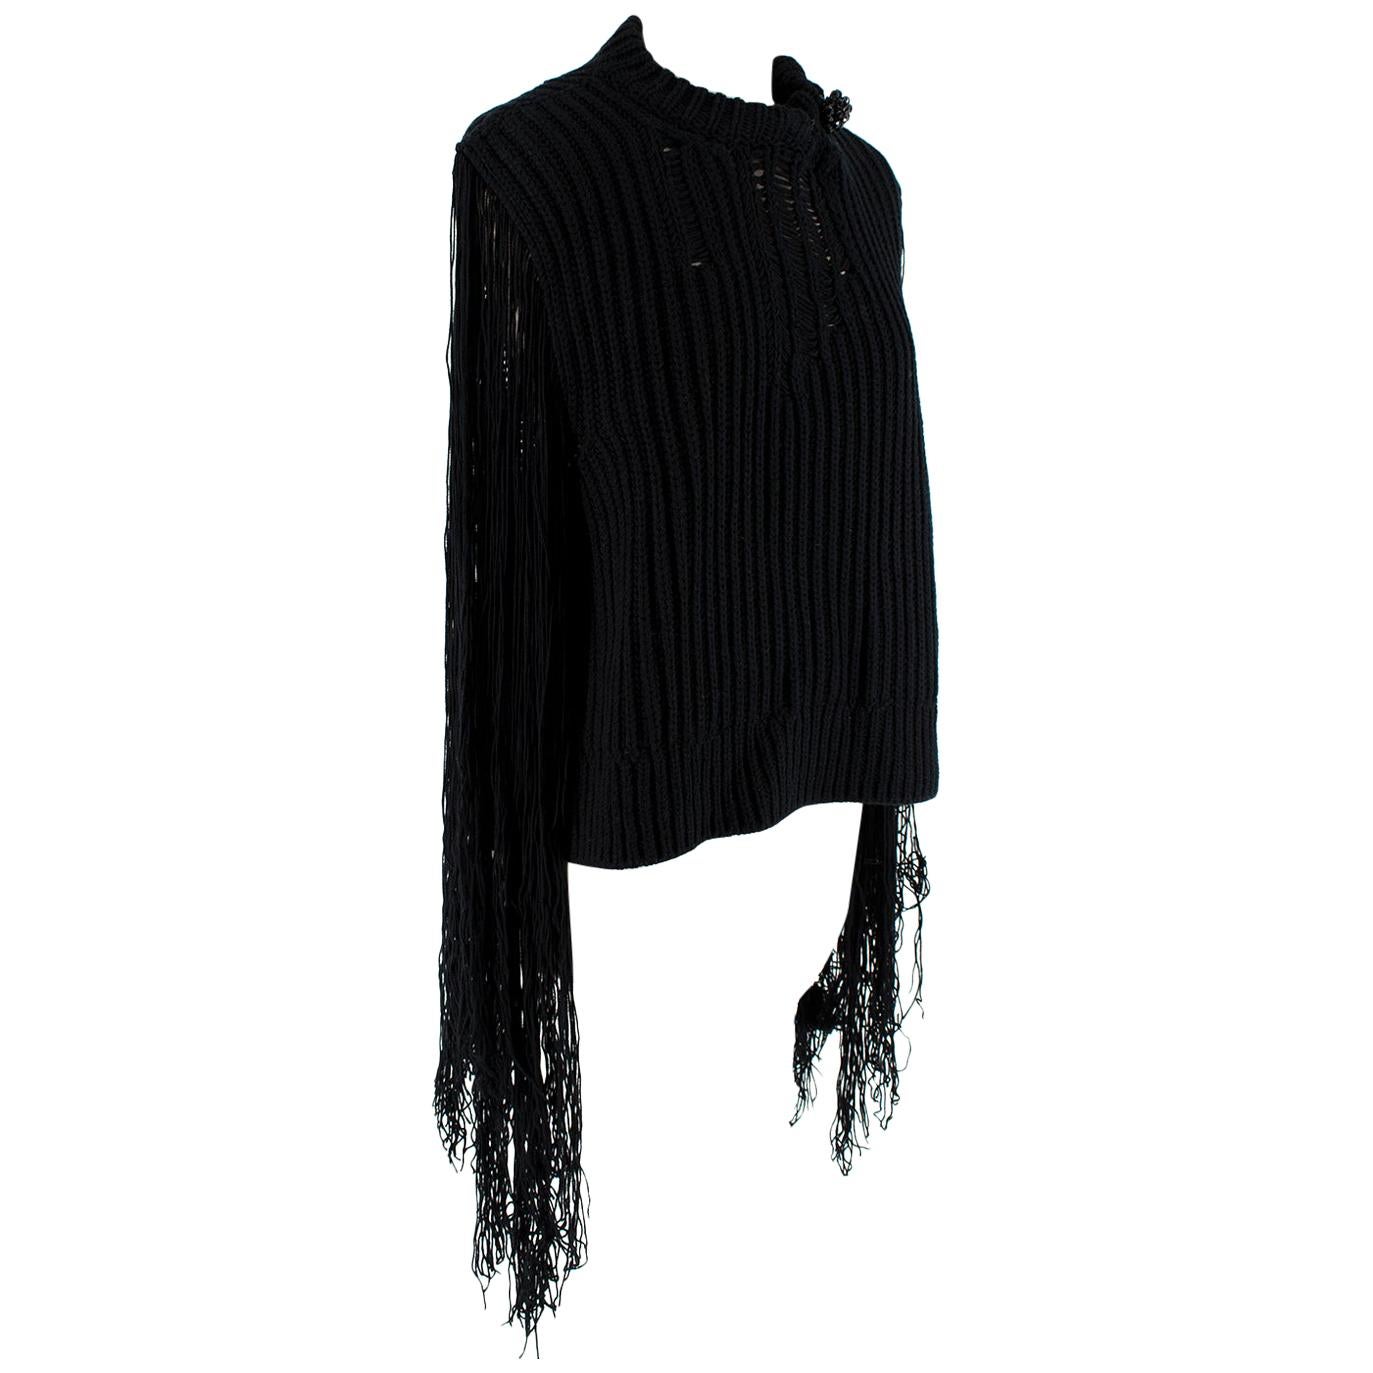 Calvin Klein 205W39NYC Black Fringed Jumper

- Detachable crystal brooch
- Distressed 
- Fringe sleeves and loose knit
- Mock neck collar with button and clasp 
- Semi sheer
- Oversized
- Mid weight

Materials: 
100% Acrylic

Made in Italy